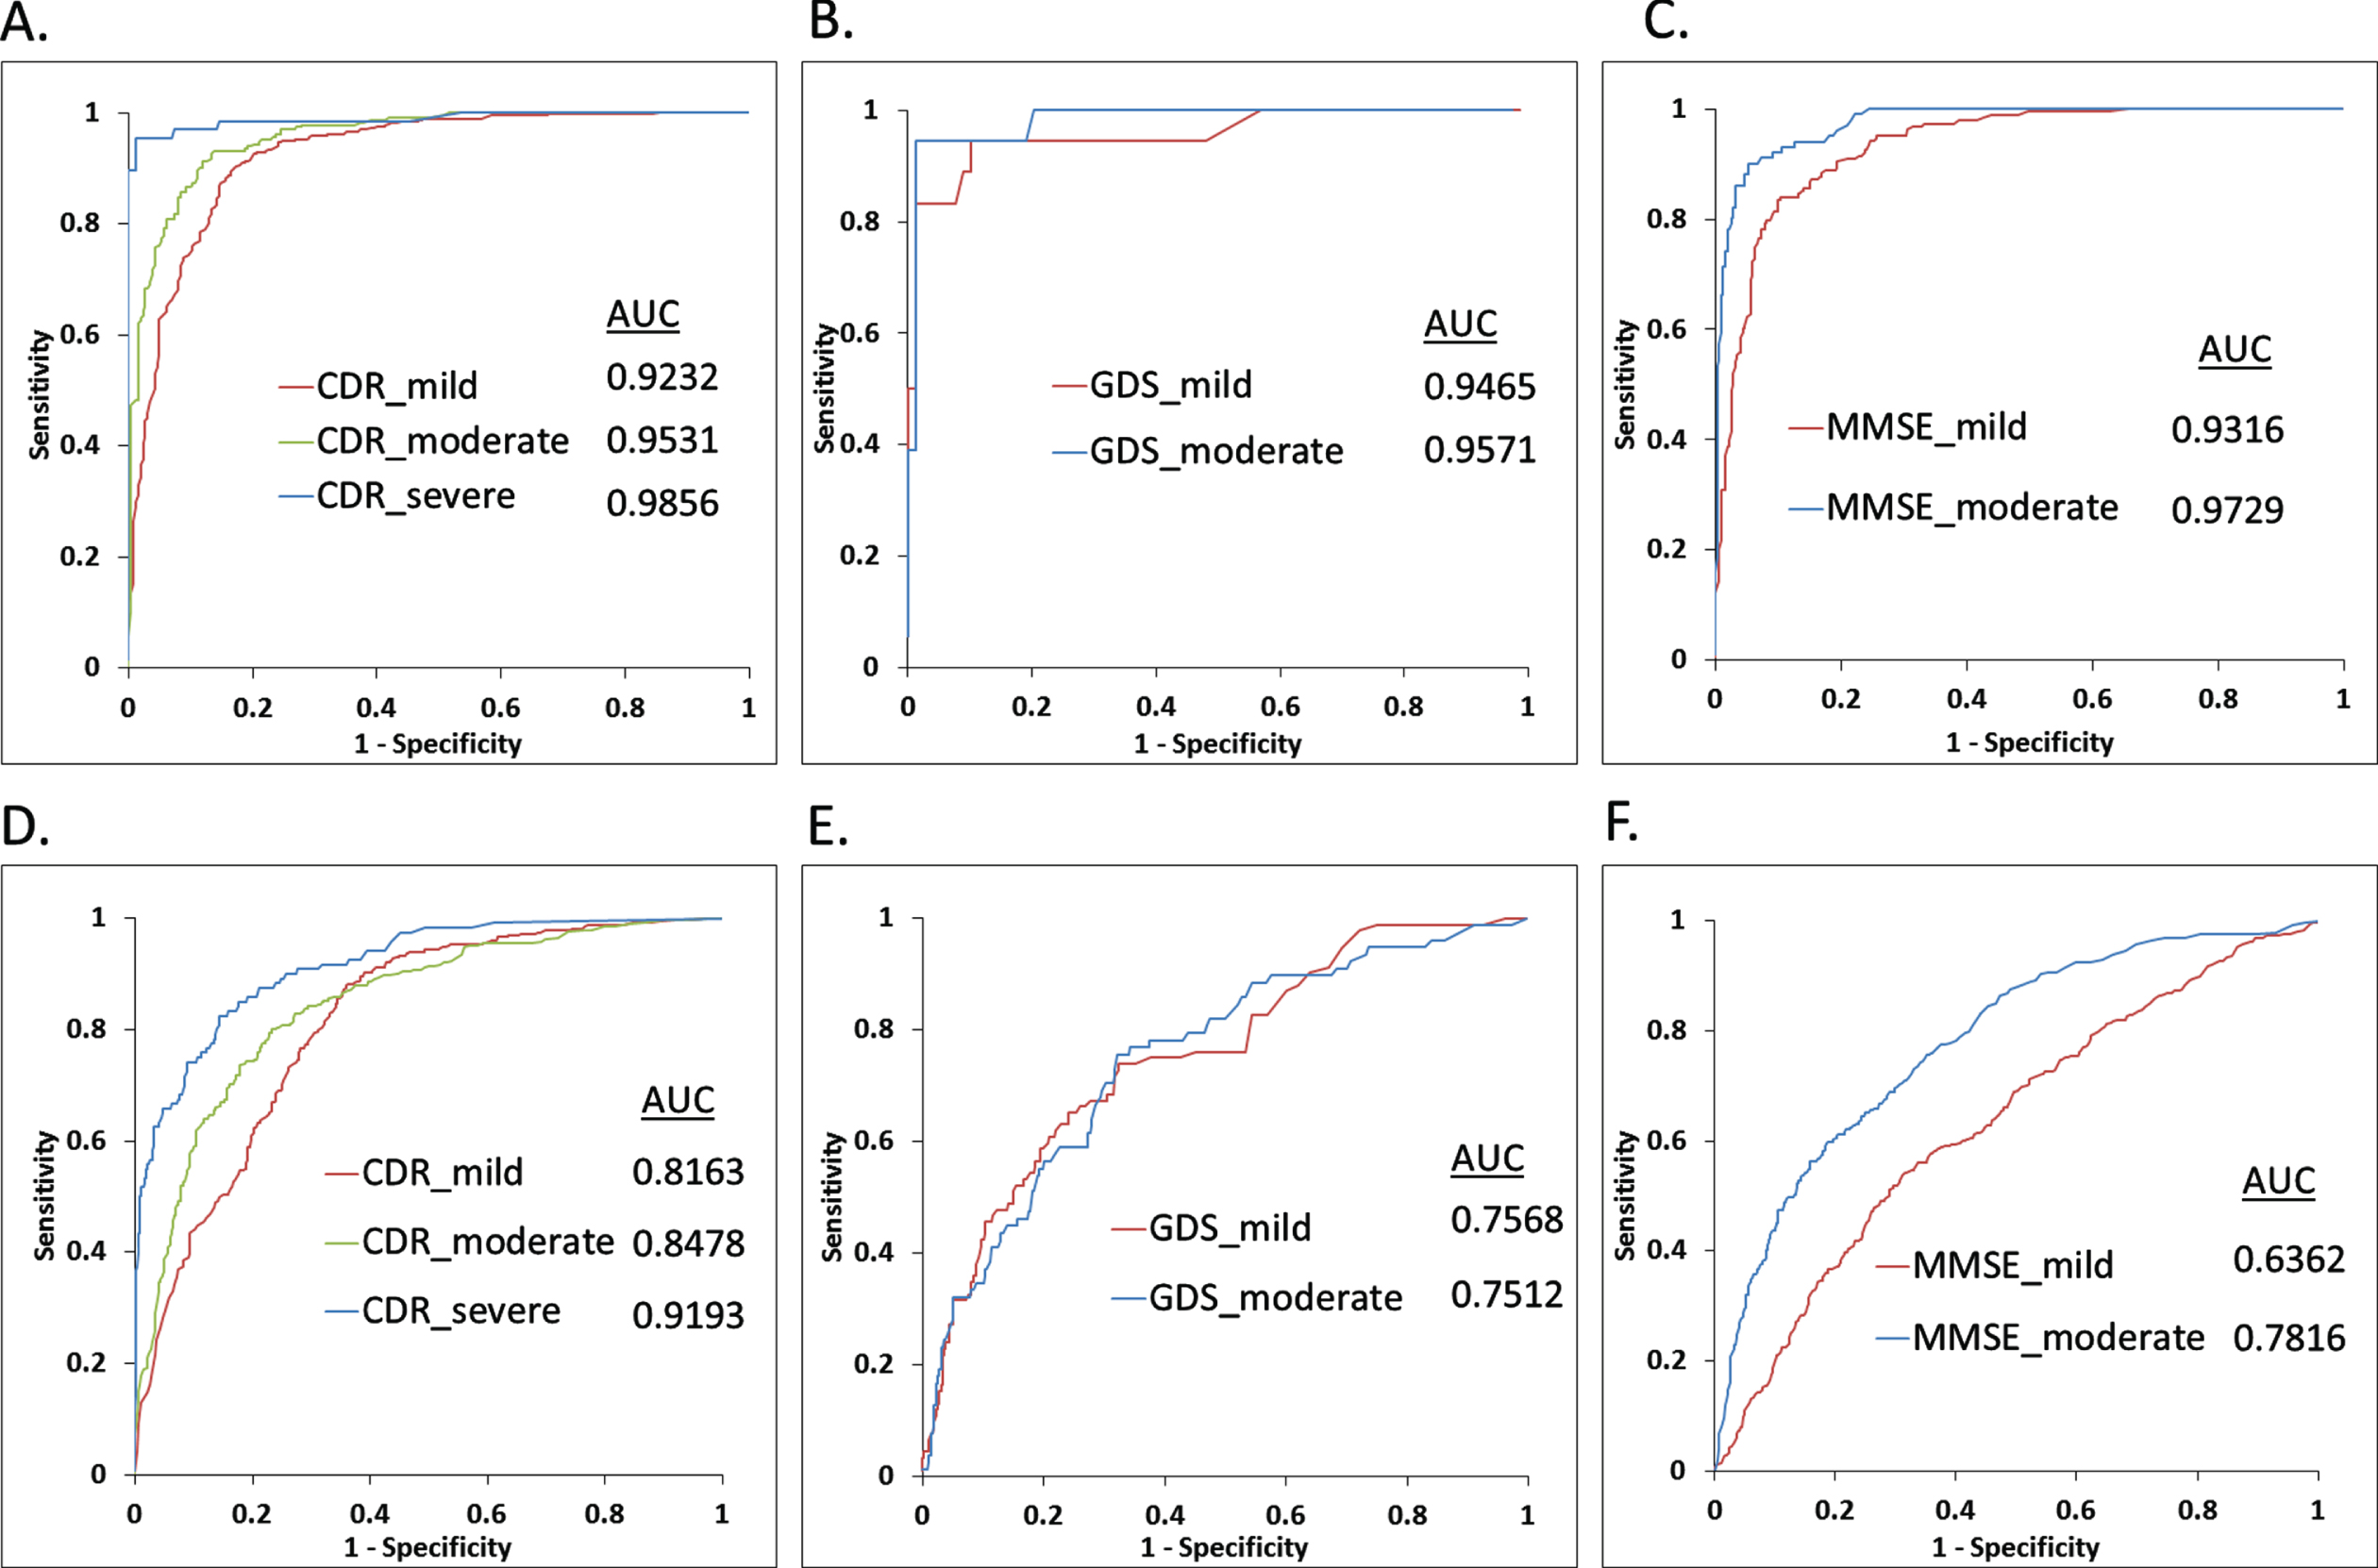 Benchmarking results for test and validation datasets. Panels A, B, and C show the receiver operating characteristics (ROC) curves via plotting the sensitivity and 1-specificity values obtained for classification of test sets using the CDR, GDS, and MMSE categorization based healthy and demented groups, respectively. Panels D, E and F show the ROC plots for the separate validation dataset using the CDR, GDS, and MMSE categorization based healthy and demented groups, respectively. Area under curve (AUC) values correspond to each ROC curve are mentioned.